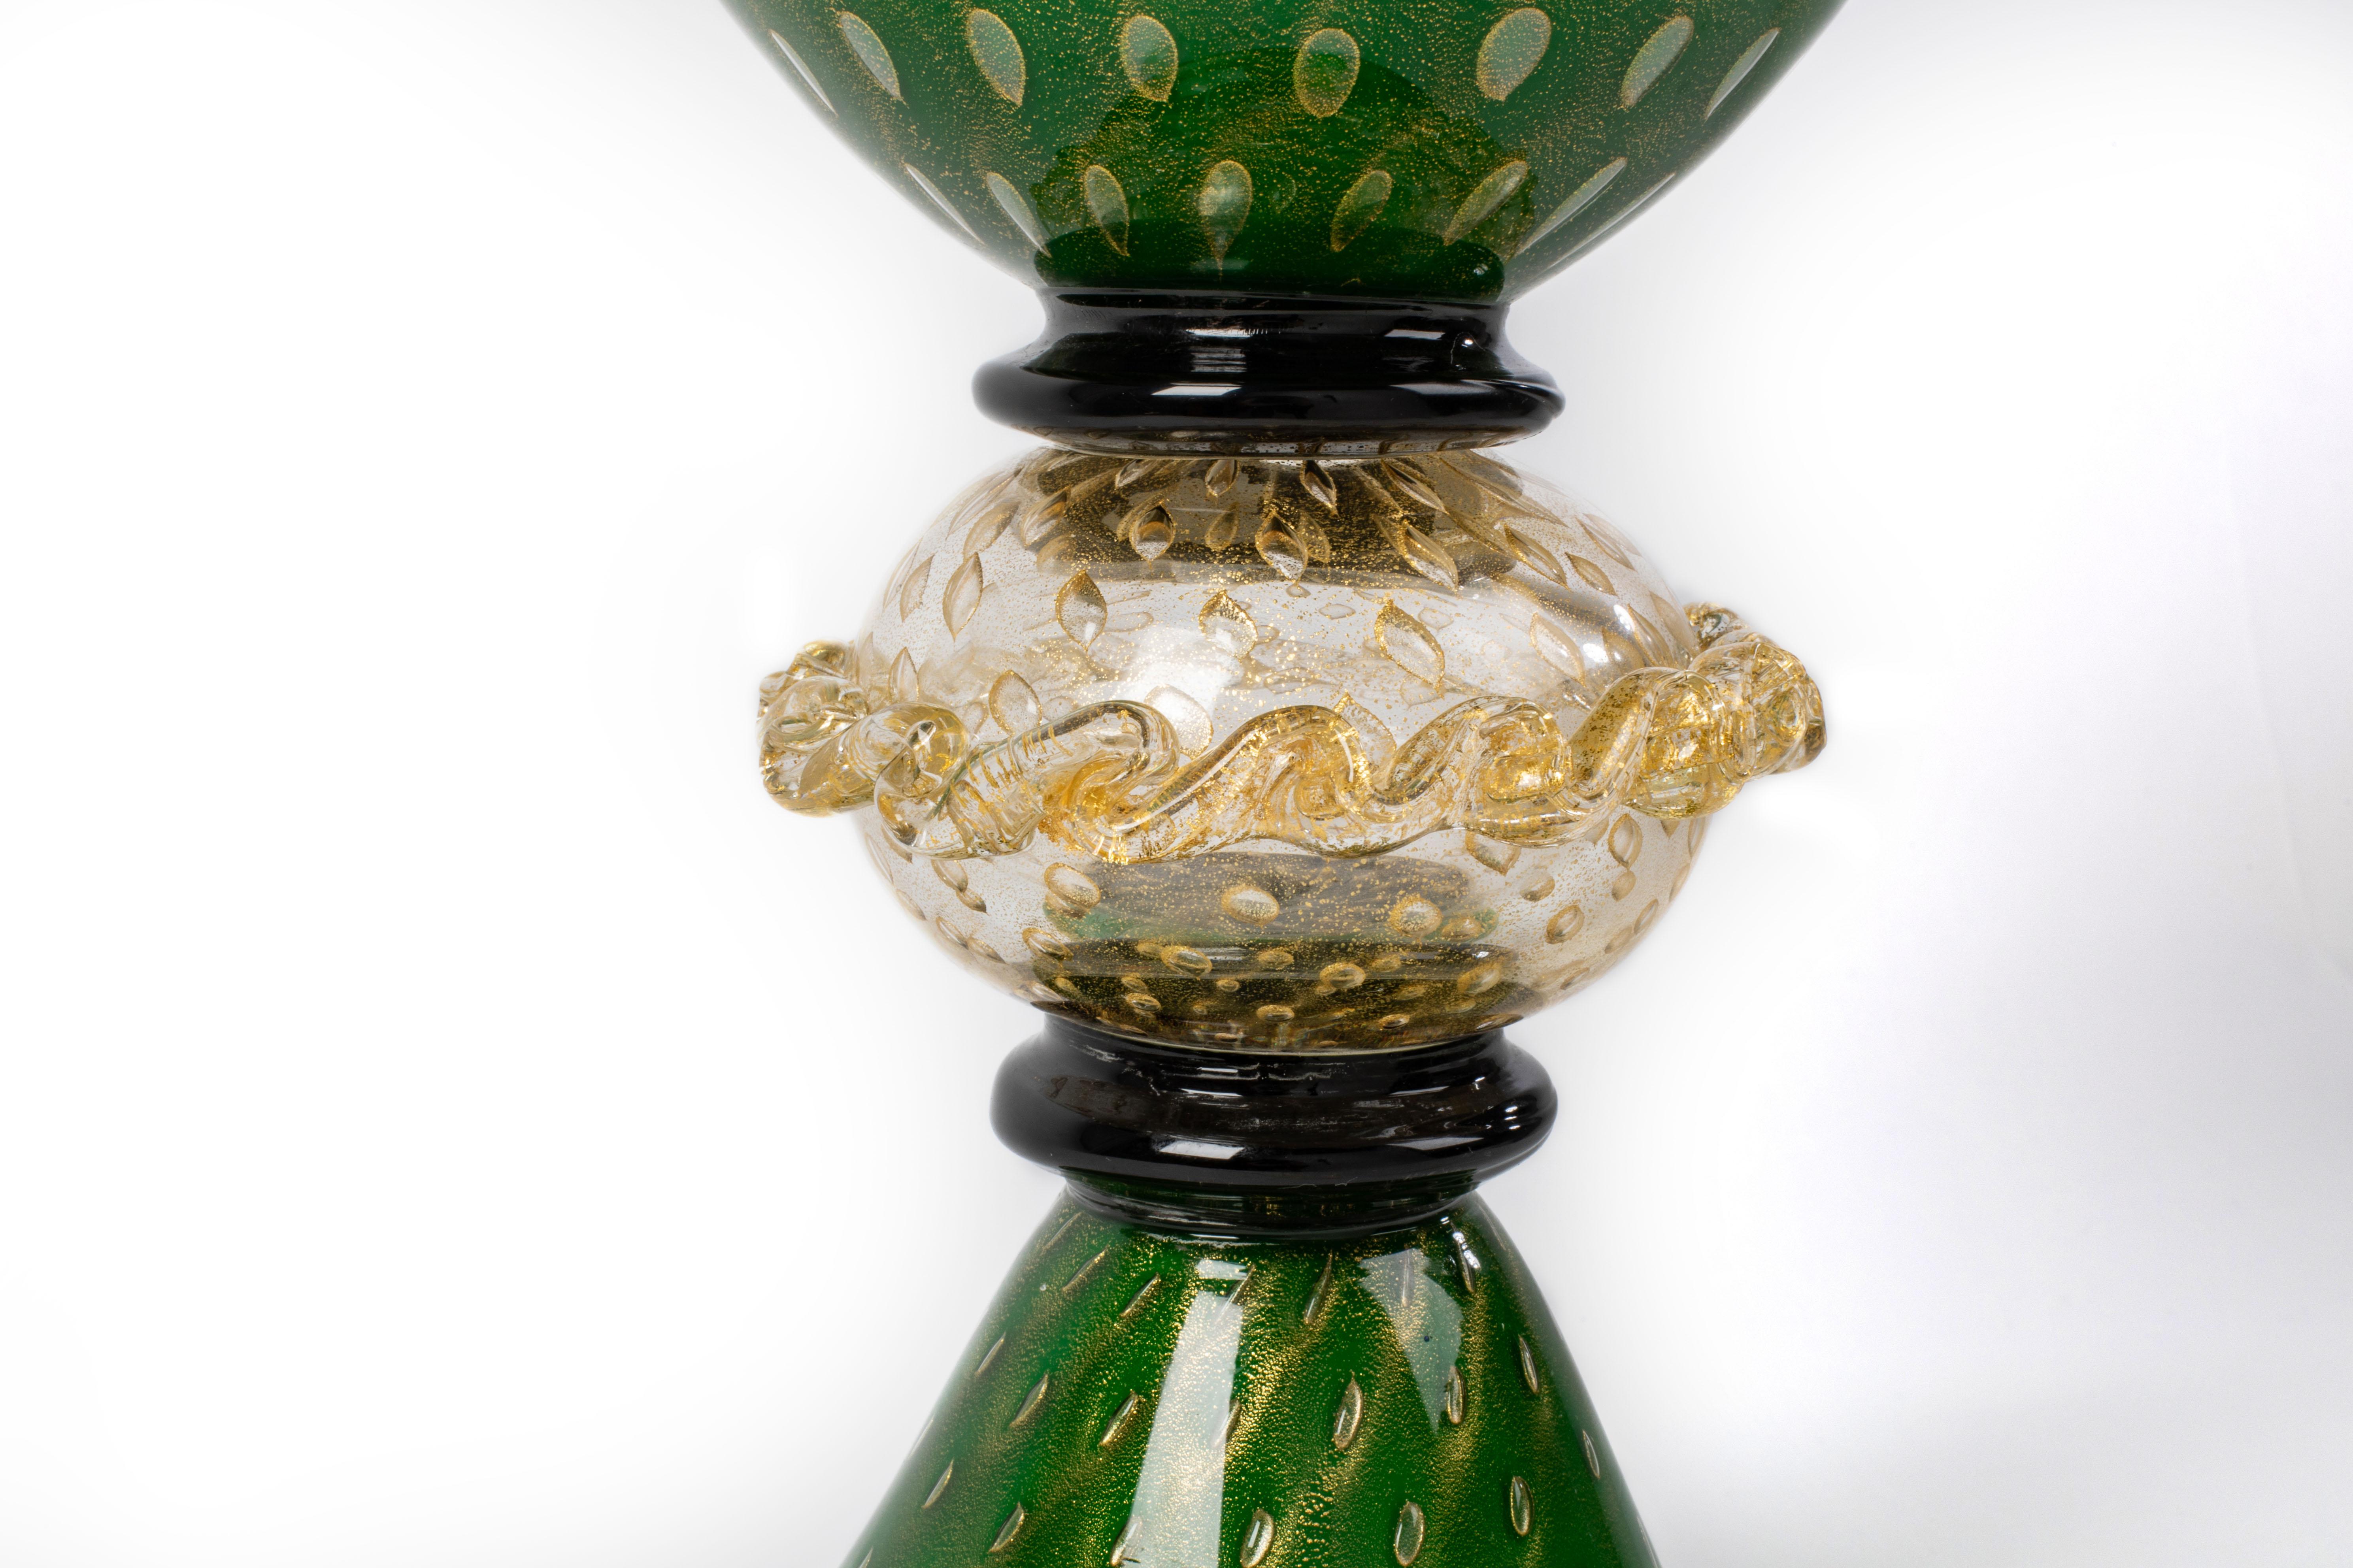 1295 Murano Hand Made Art Glass Table Lamp, Grande Mela, 24K Gold Leaf In New Condition For Sale In Venice, VE